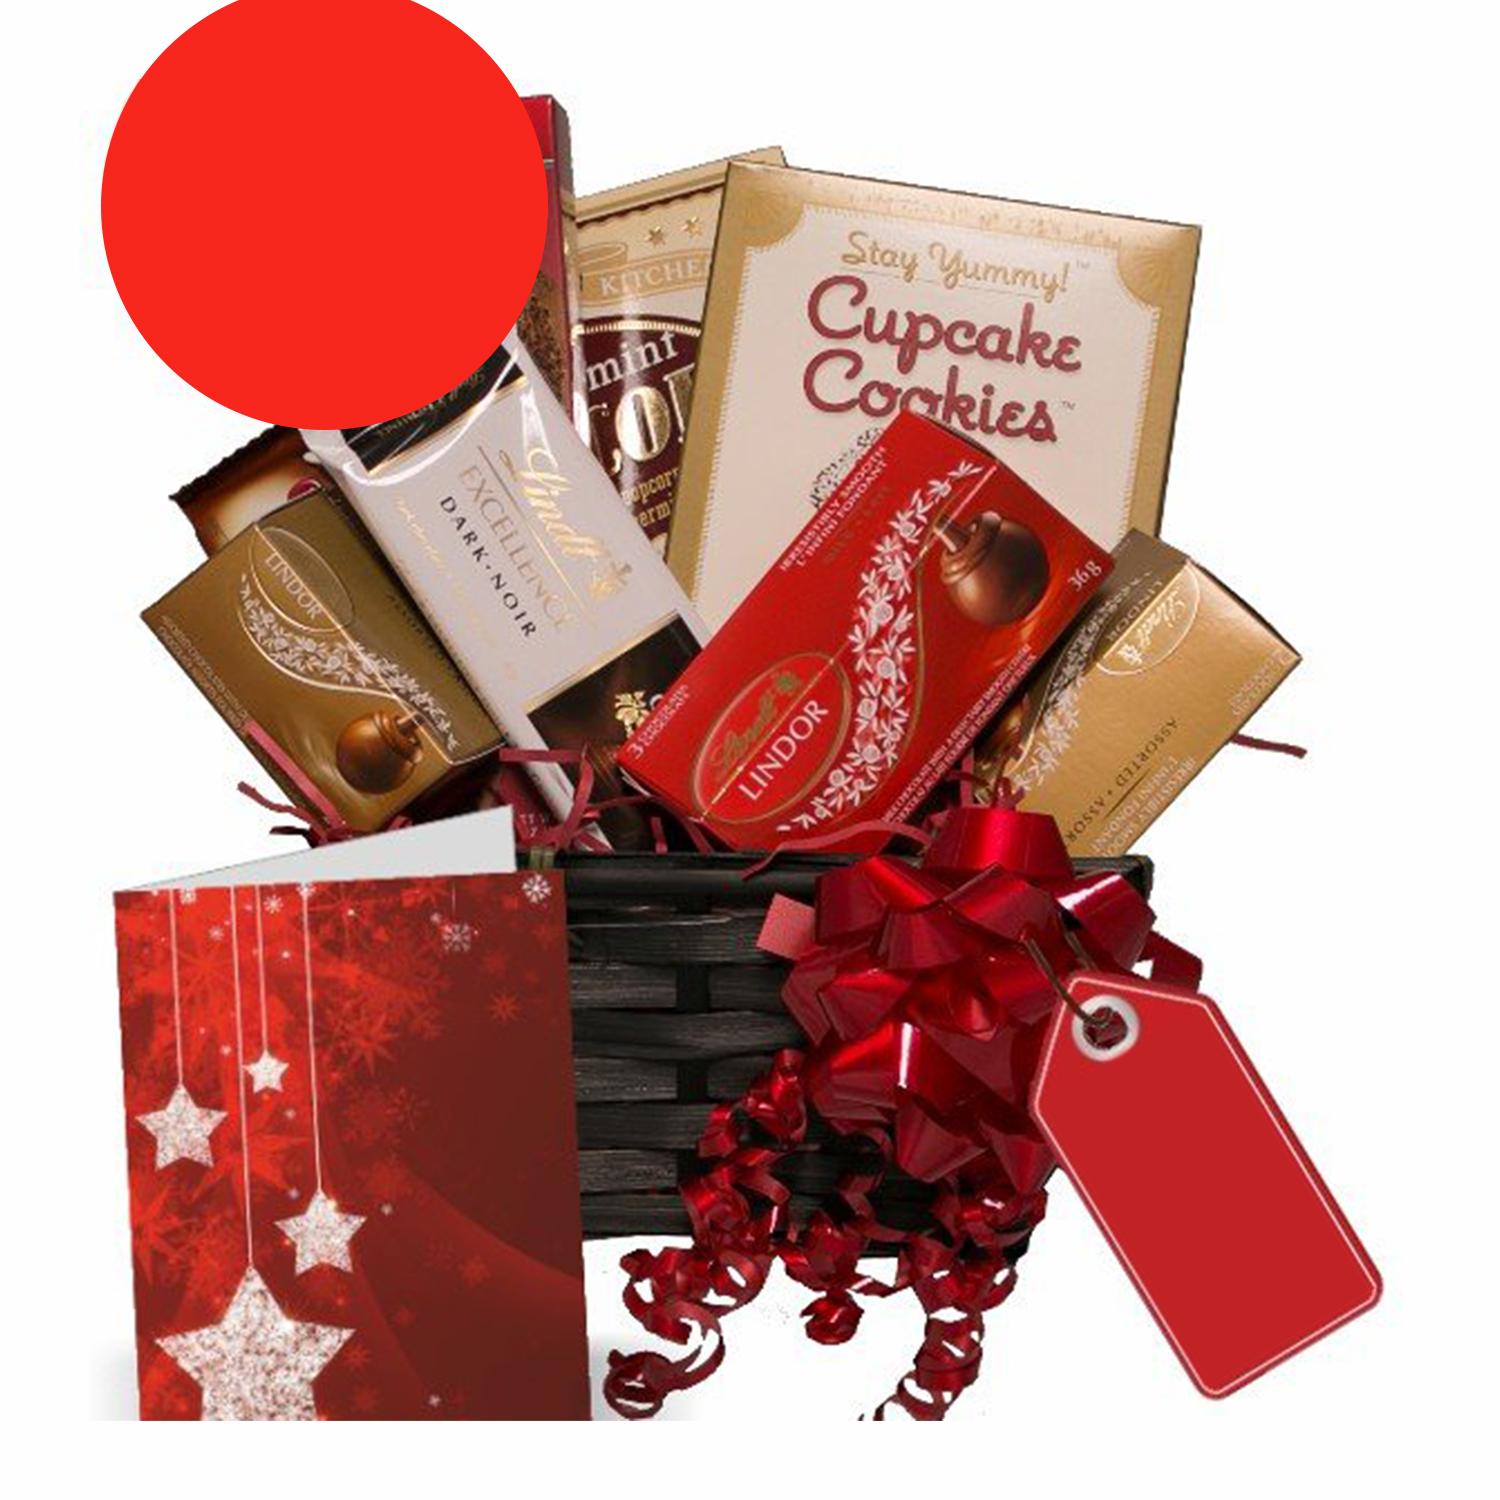 O Canada Gift Basket - Made In Canada Gifts